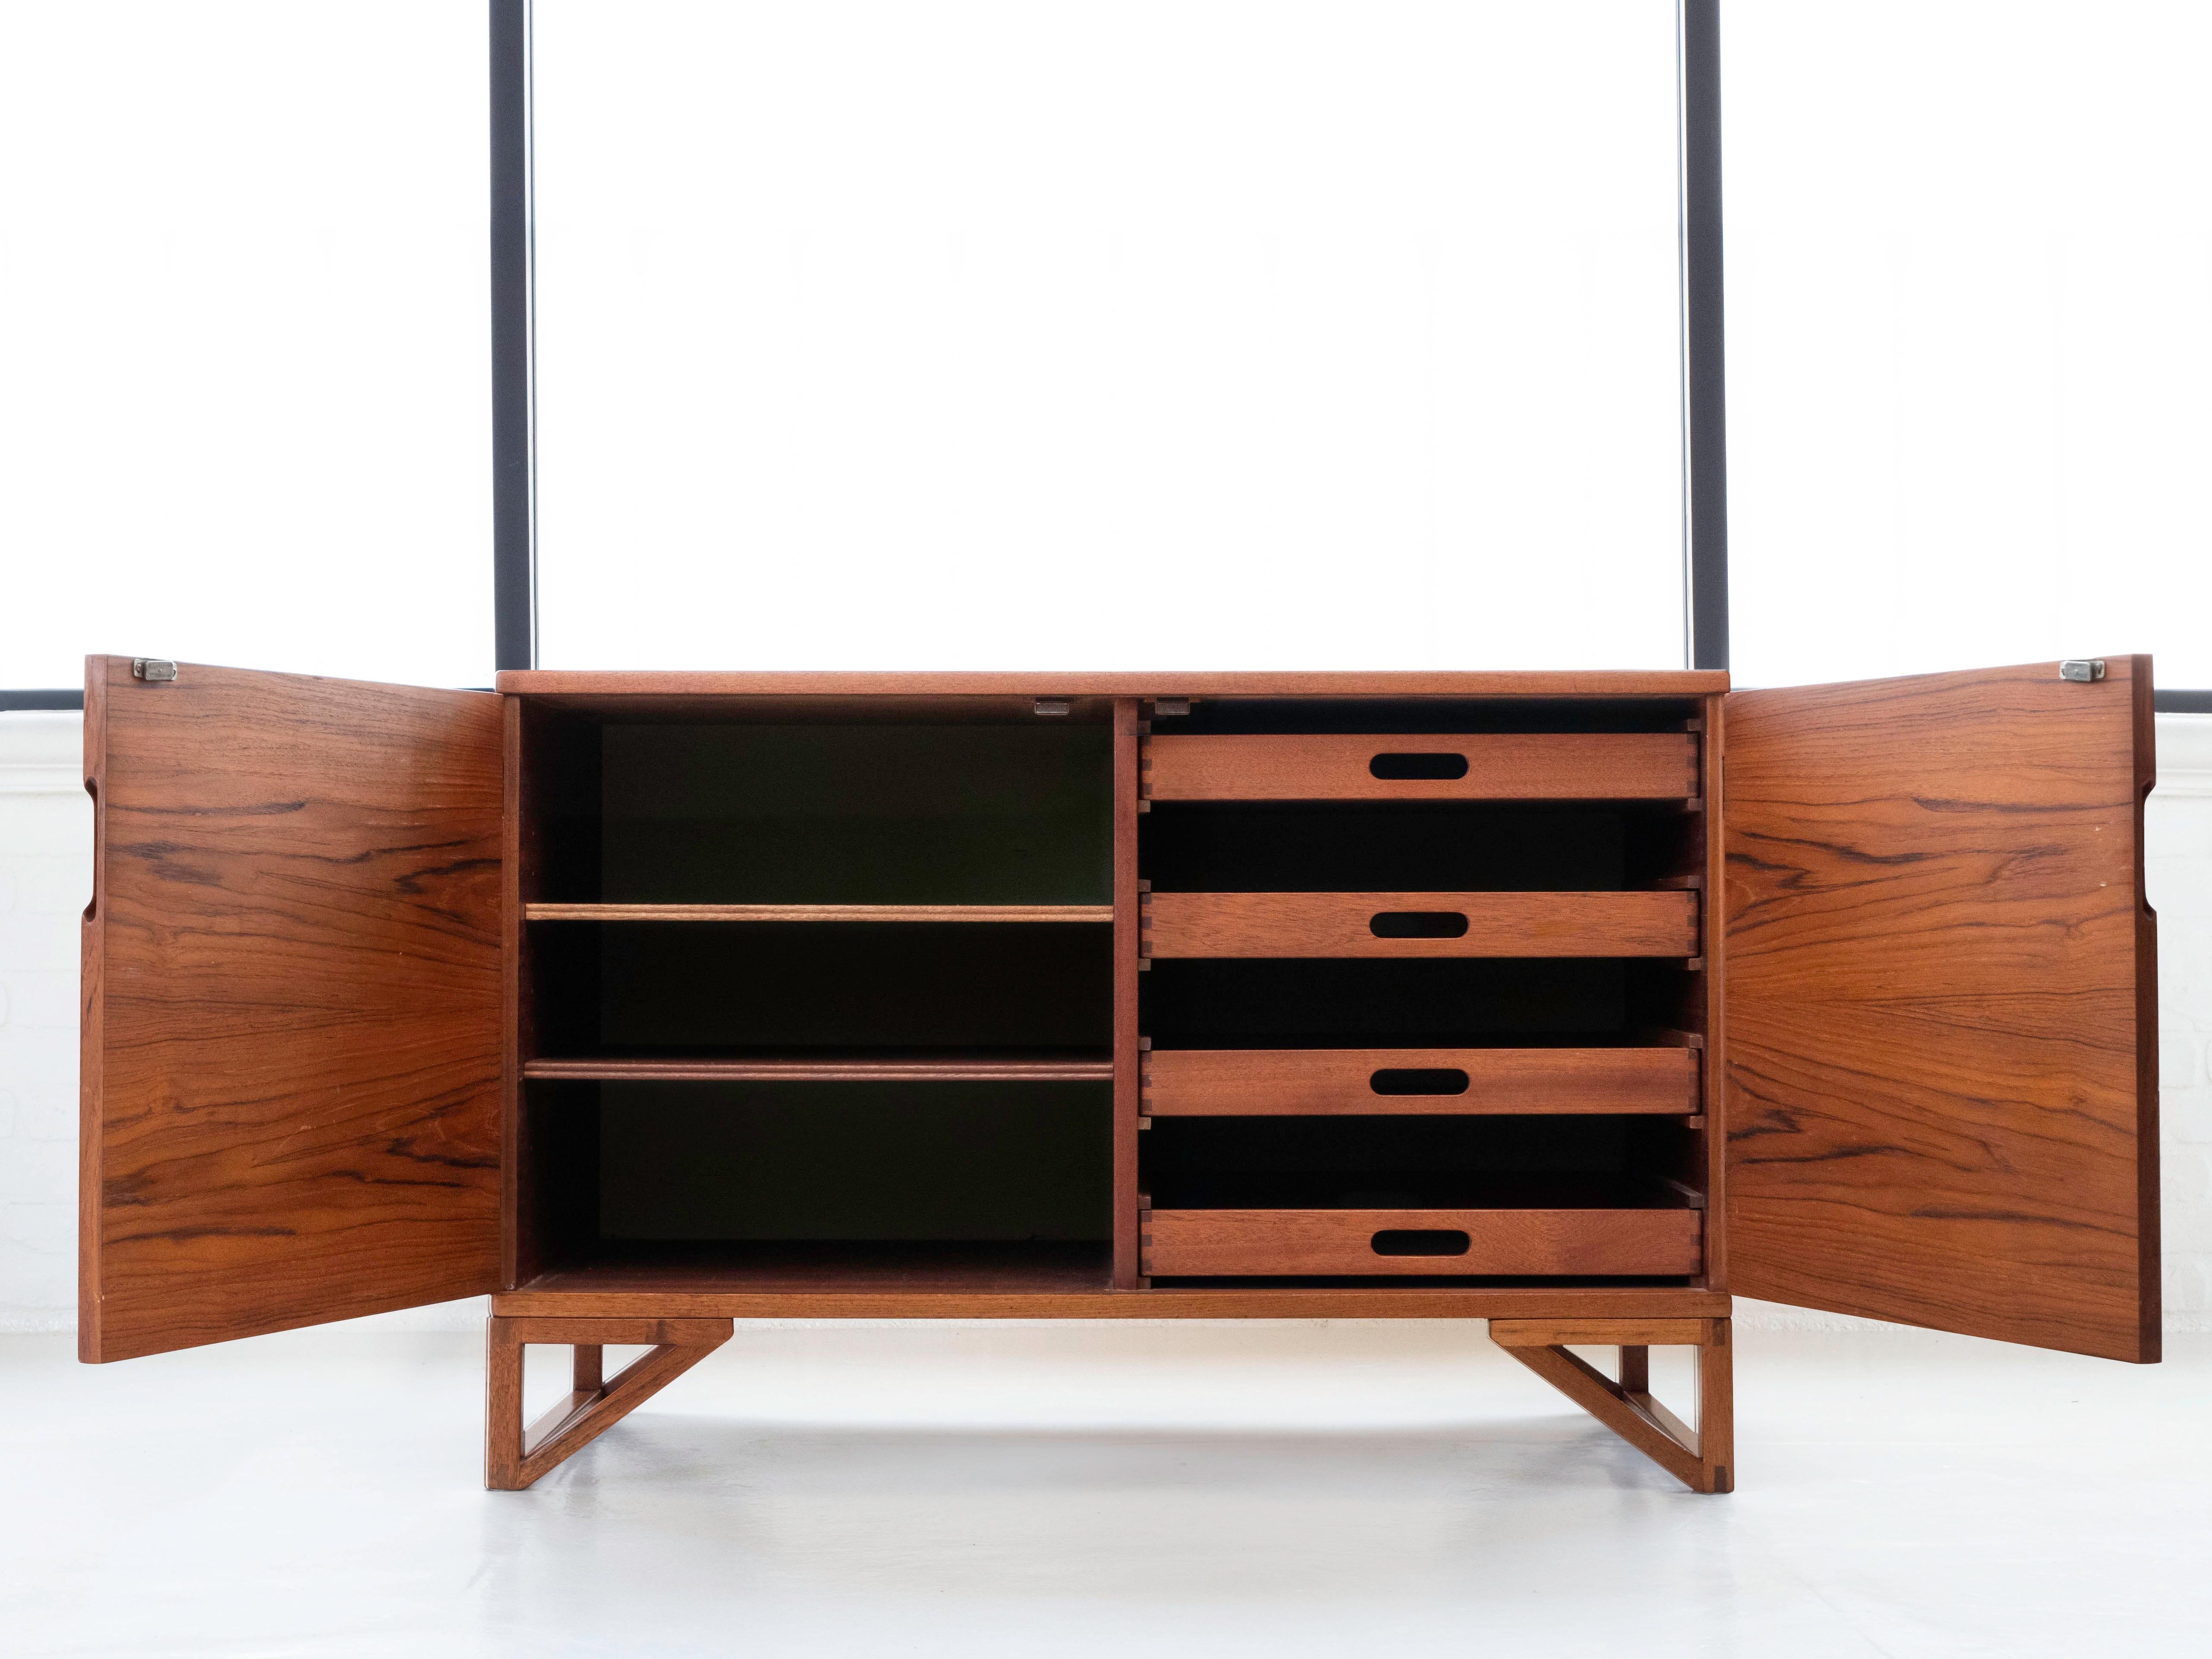 Mid-20th Century Svend Langkilde Bookmatched Teak Cabinet for Illums Bolighus, Denmark, 1960's For Sale